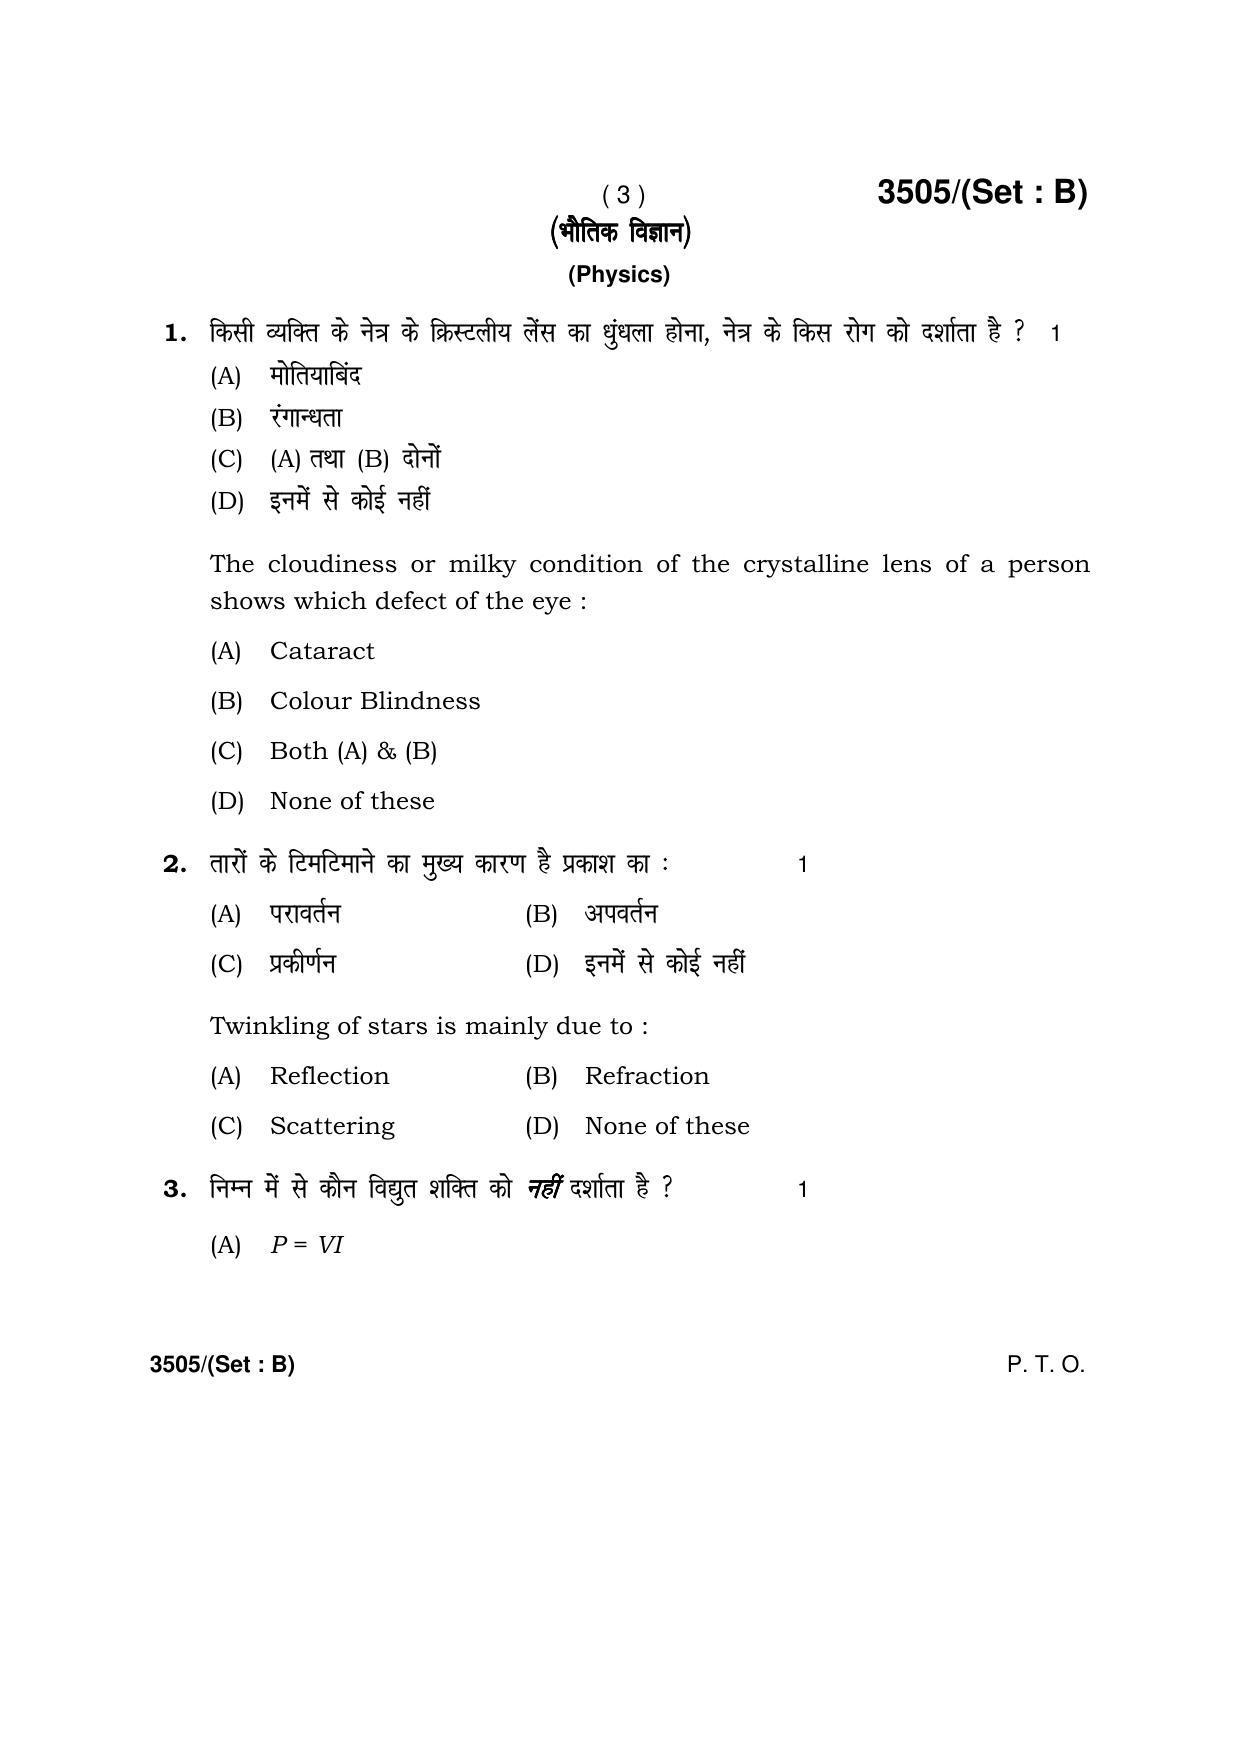 Haryana Board HBSE Class 10 Science -B 2018 Question Paper - Page 3